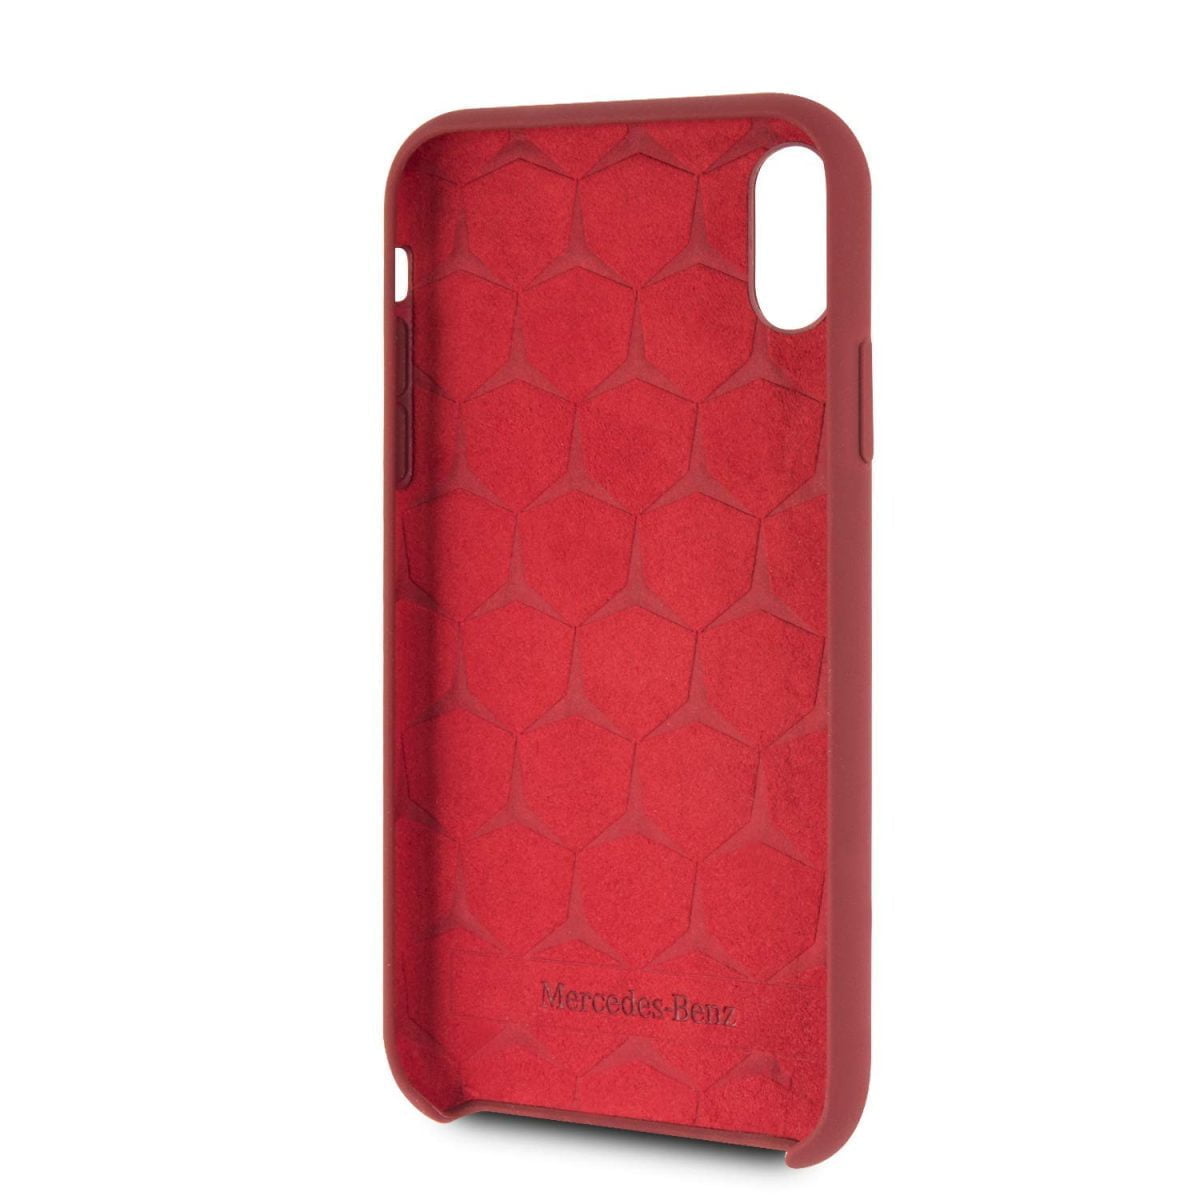 Mercedes Benz Iphone Xr Liquid Silicone Case With Microfiber Lining Red Drop Protection Easily Accessible Ports Officially Licensed 02 &Lt;H1&Gt;Iphone Xs Max Liquid Silicone Case With Microfiber Lining Red (Mercedes-Benz)&Lt;/H1&Gt; &Lt;Span Class=&Quot;Y2Iqfc&Quot; Lang=&Quot;En&Quot;&Gt;Mercedes-Benz Pattern Ii Series. The Minimalist And Captivating Aesthetics Of Mercedes-Benz Interior Design Have Been Transferred Silicon. They Guarantee A Unique Look And Safety For Your Phone. - Leather Case With A Metallic Mercedes-Benz Logo Has A 3D Effect - The Unique Finish Enhances The Look And Quality Of This Case - Designed With Easy Access To Ports And Buttons - Case Compatible With Wireless Chargers Collection: Pattern Line Twister Type: Hardcase Material:silicon Red  Compatibility: Iphone X / Xs Product Manufactured Under License From Mercedes-Benz.&Lt;/Span&Gt; Iphone Cases Iphone Xs Max Liquid Silicone Case With Microfiber Lining Red (Mercedes-Benz)